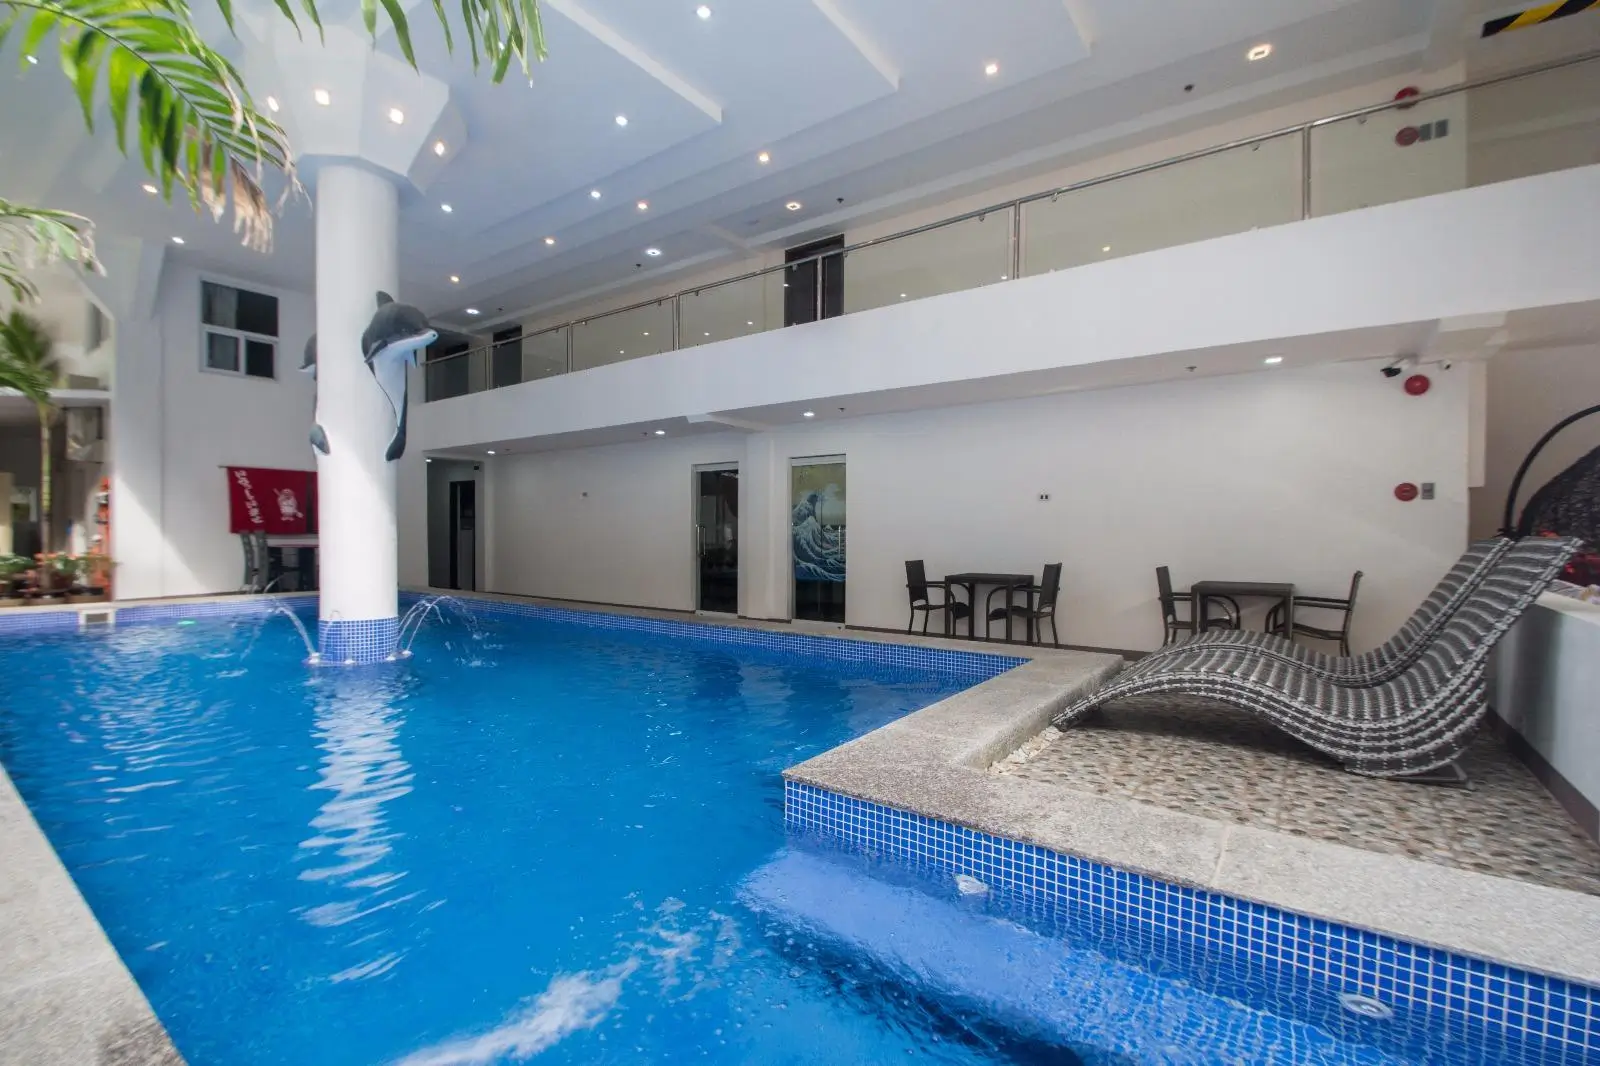 Indoor swimming pool at IL Mare Sakura Resort, a boutique hotel in Boracay, featuring a dolphin sculpture leaping from a central column, surrounded by a blue-tiled pool and two-tiered lounging areas.